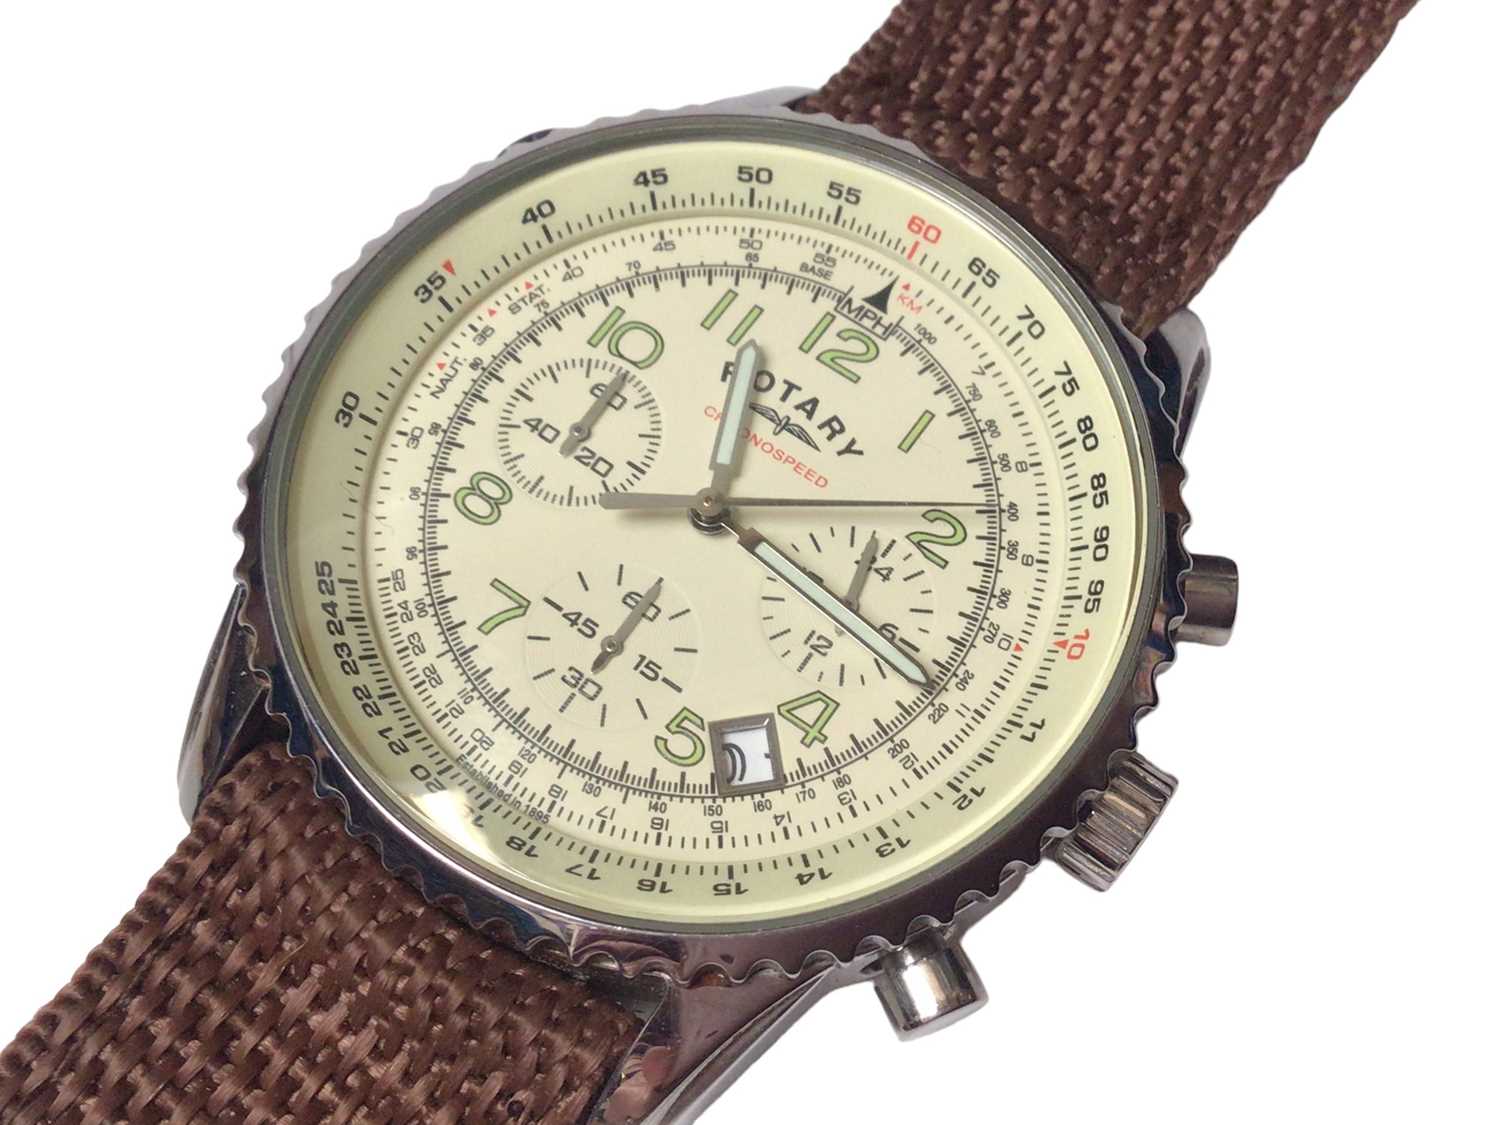 Orvis Chronograph military style wristwatch and a Rotary Chronospeed wristwatch (2) - Image 5 of 6